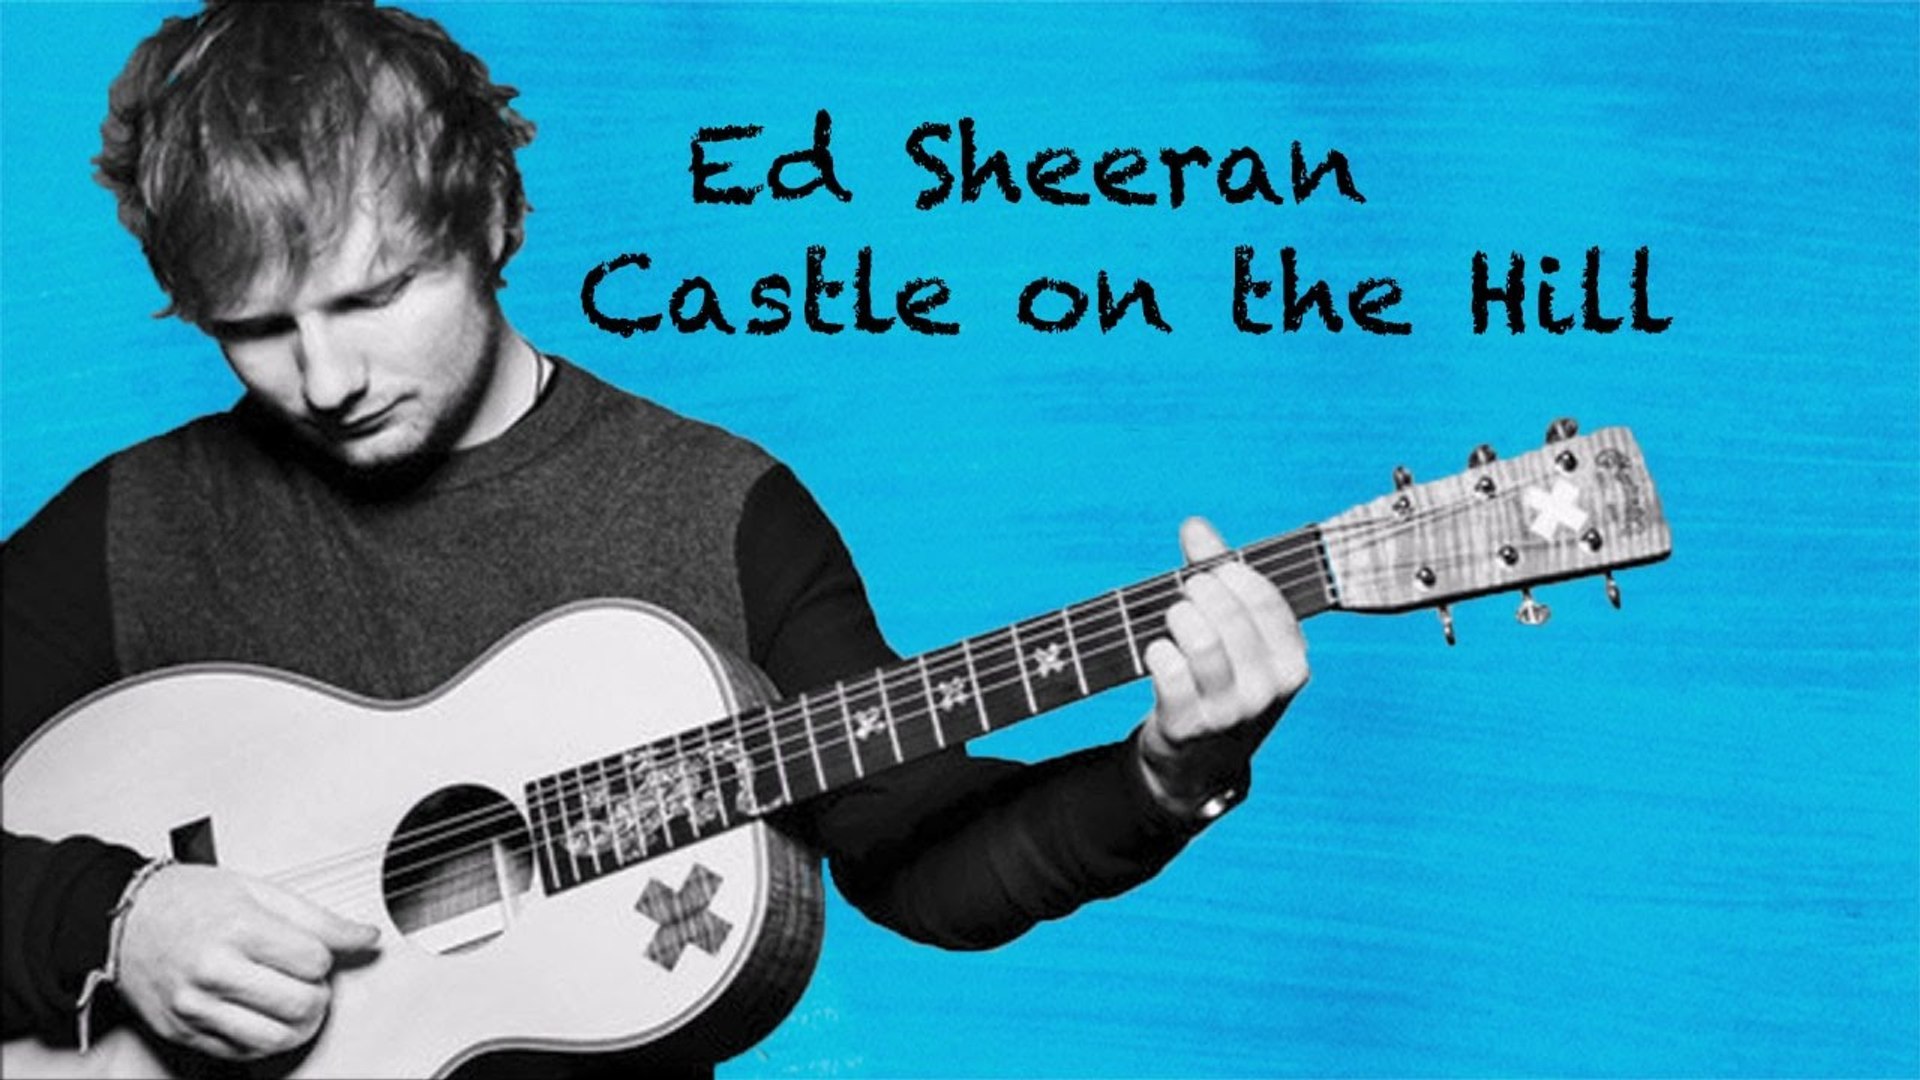 Ed Sheeran - Castle On The Hill [Official Video Clip] [Full HD,1920x1080] -  Vidéo Dailymotion